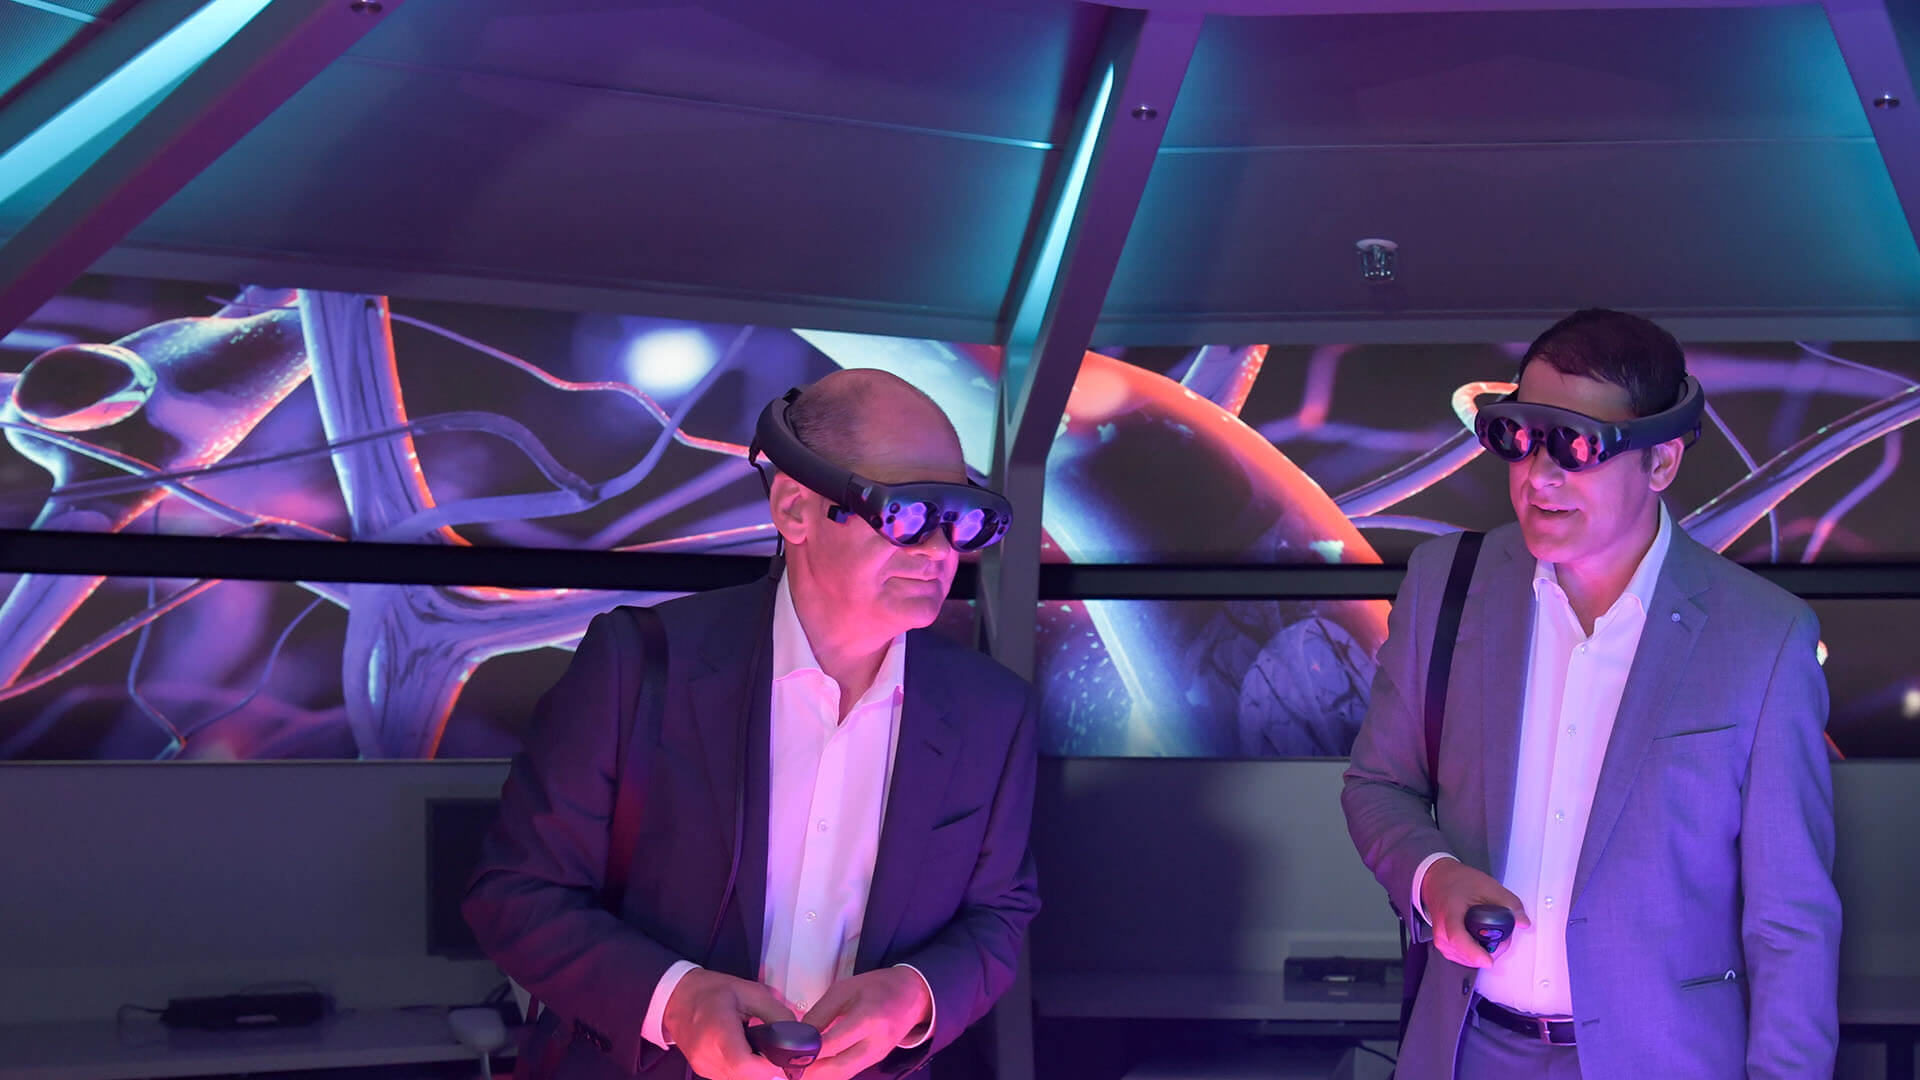 A demo of the Mixed Reality Viewer, a technology that produces hyper-realistic 3D patient data